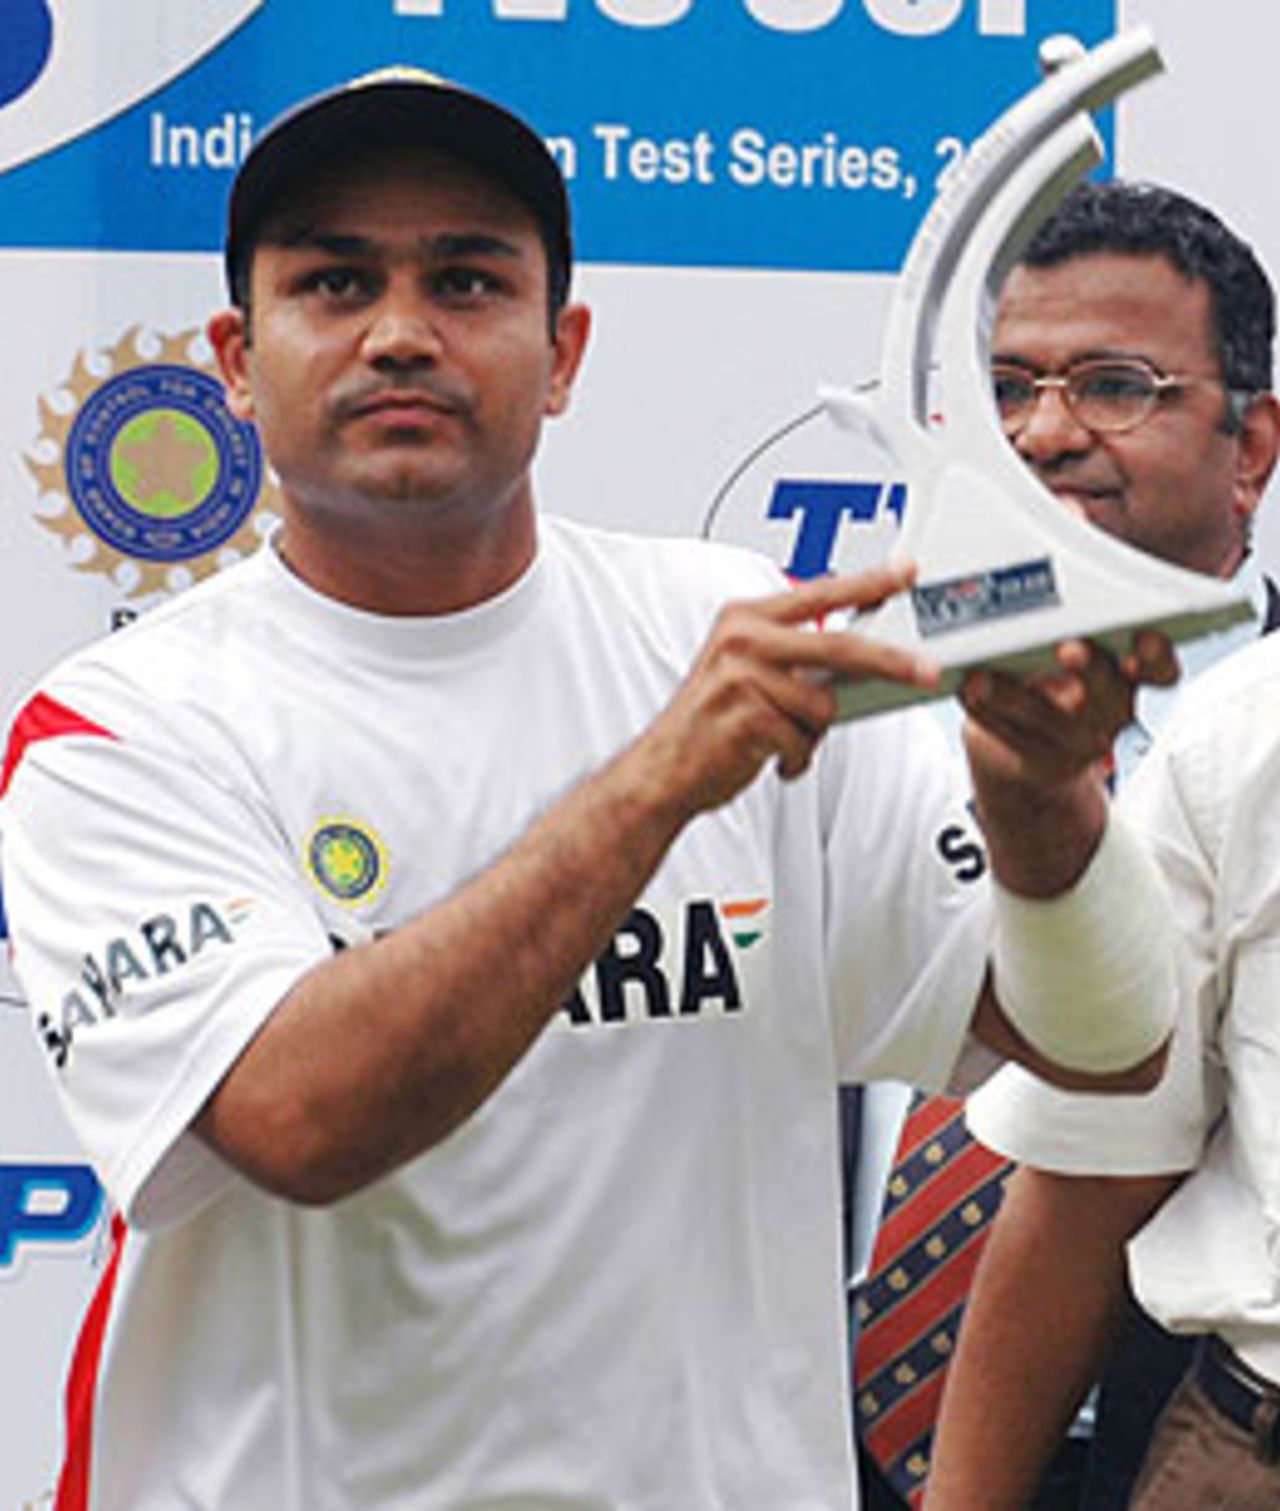 Virender Sehwag, the Delhi dasher, was adjudged Man-of-the-Series, for his aggregate of 544 runs from 6 innings, India v Pakistan, 3rd Test, Bangalore, 24-28 Mar 2005